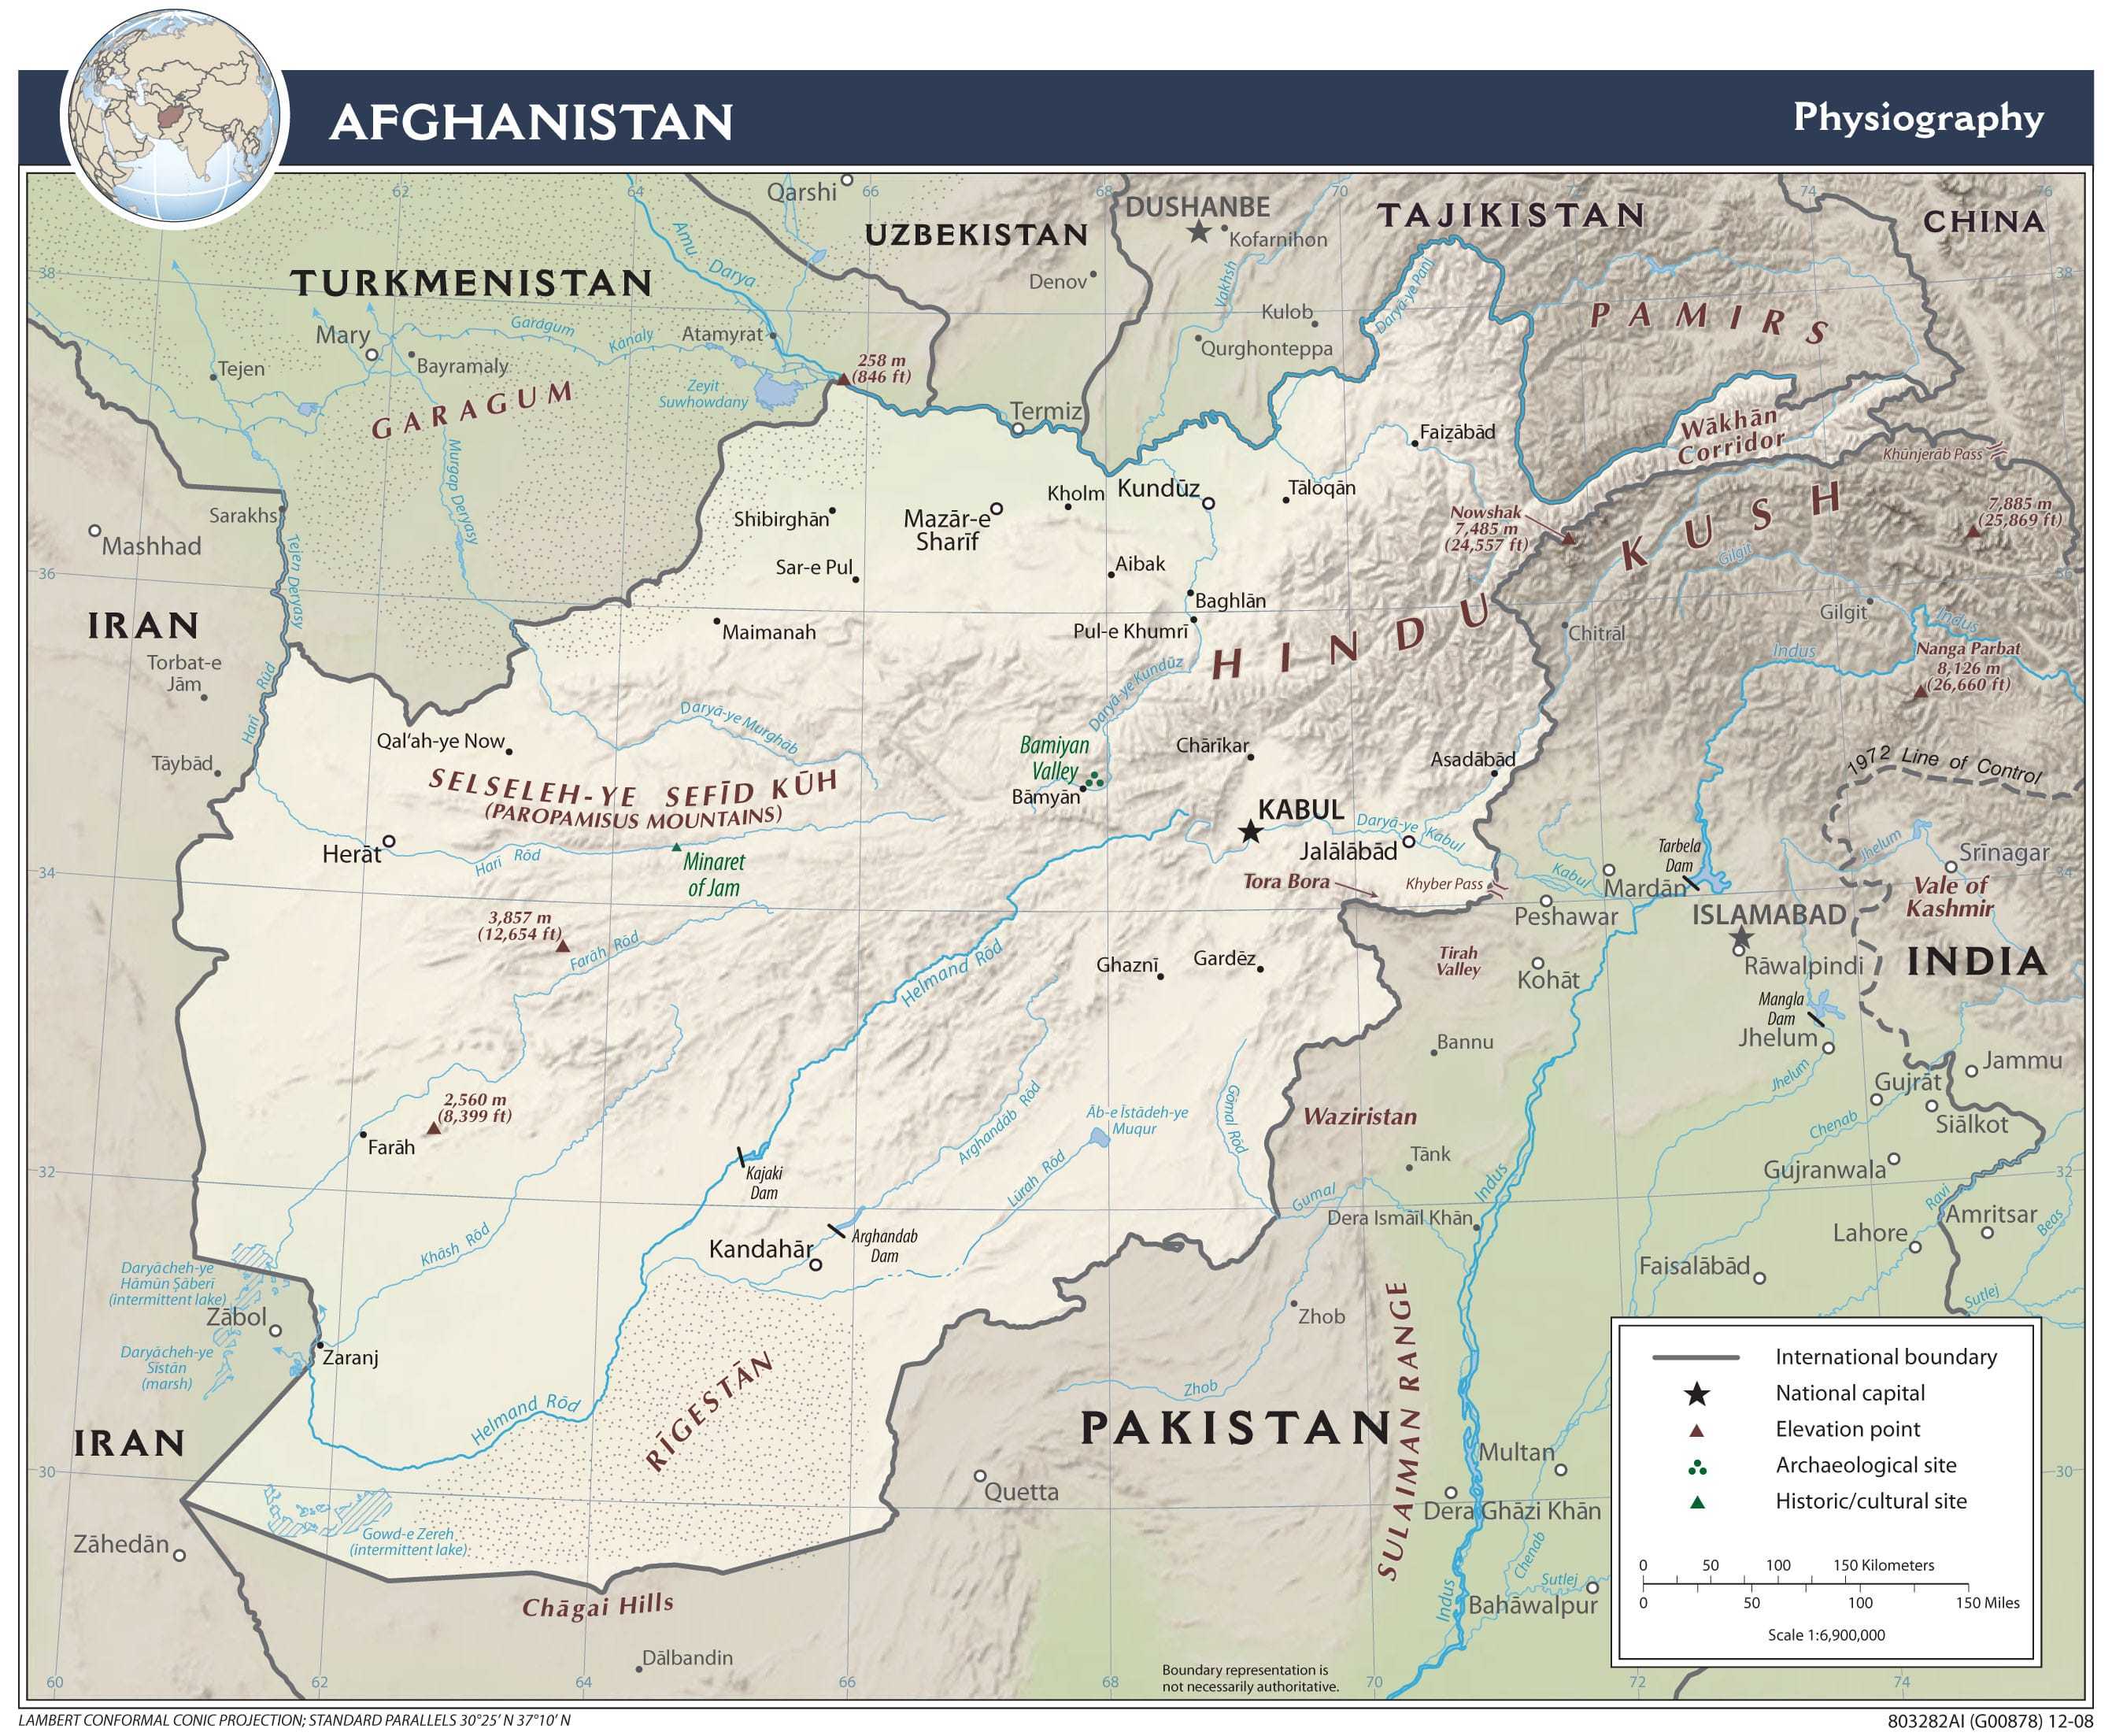 Physiographical map of Afghanistan.